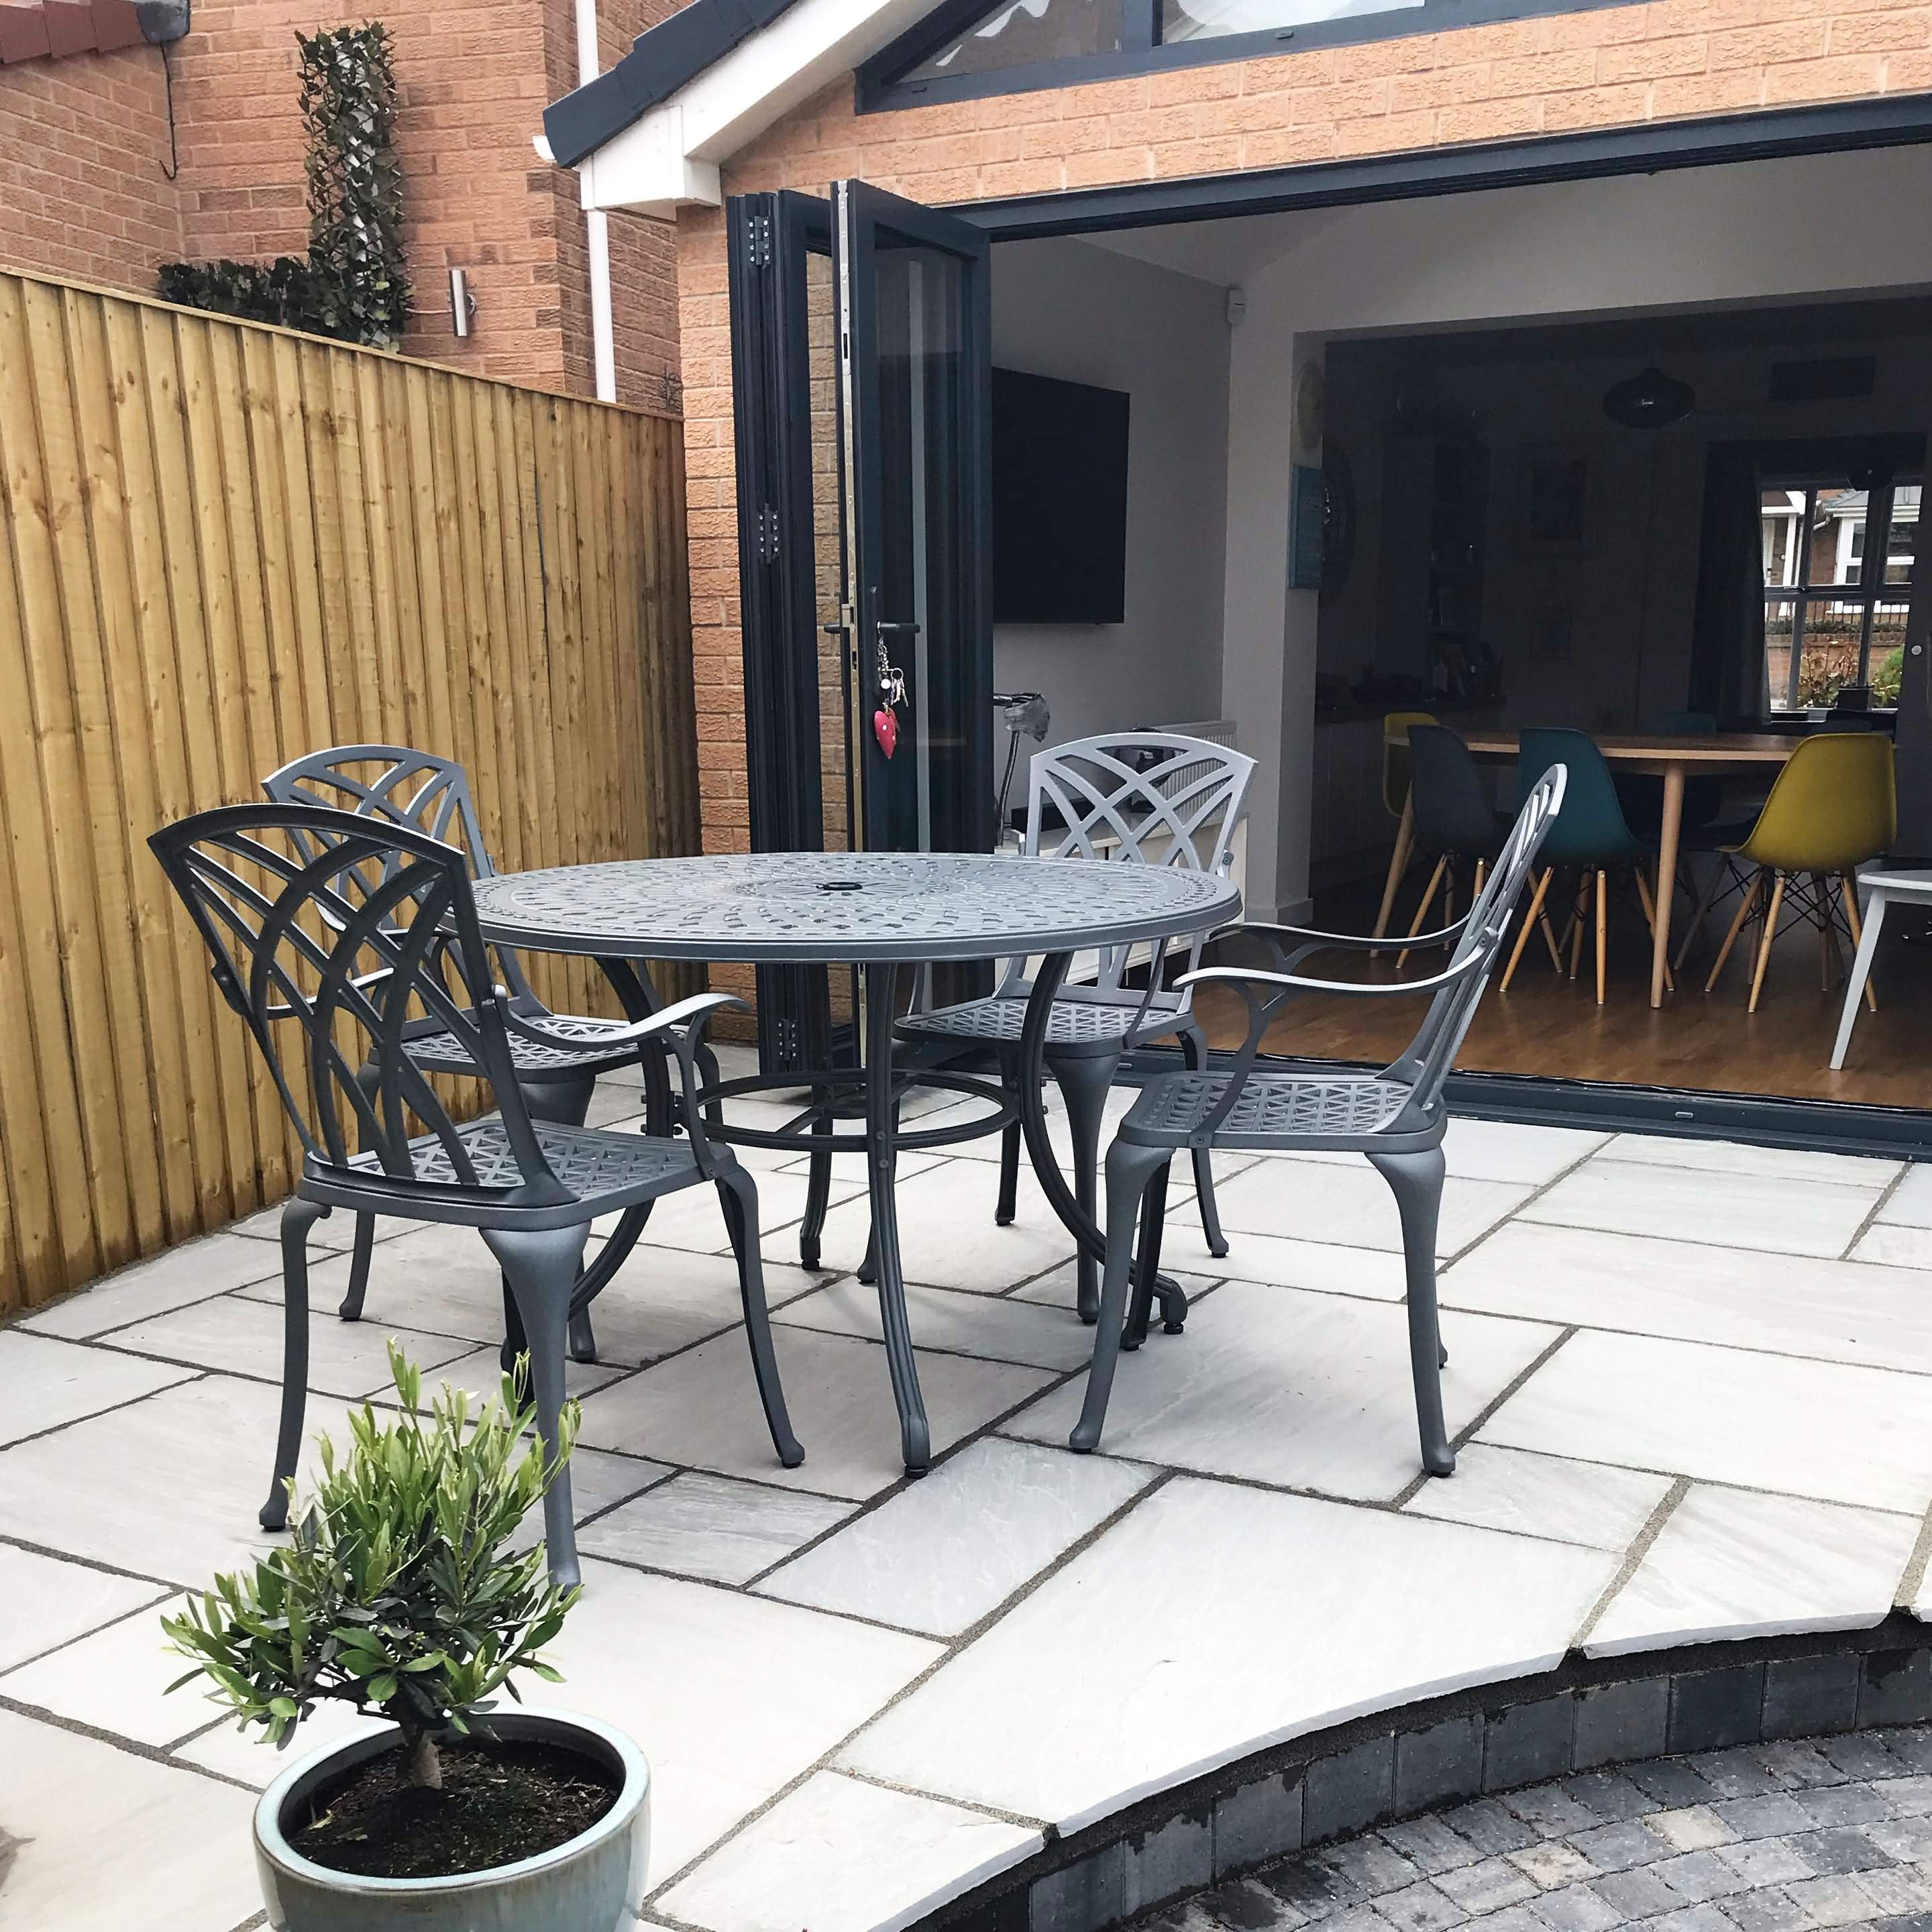 What type of garden furniture is best for a city garden?